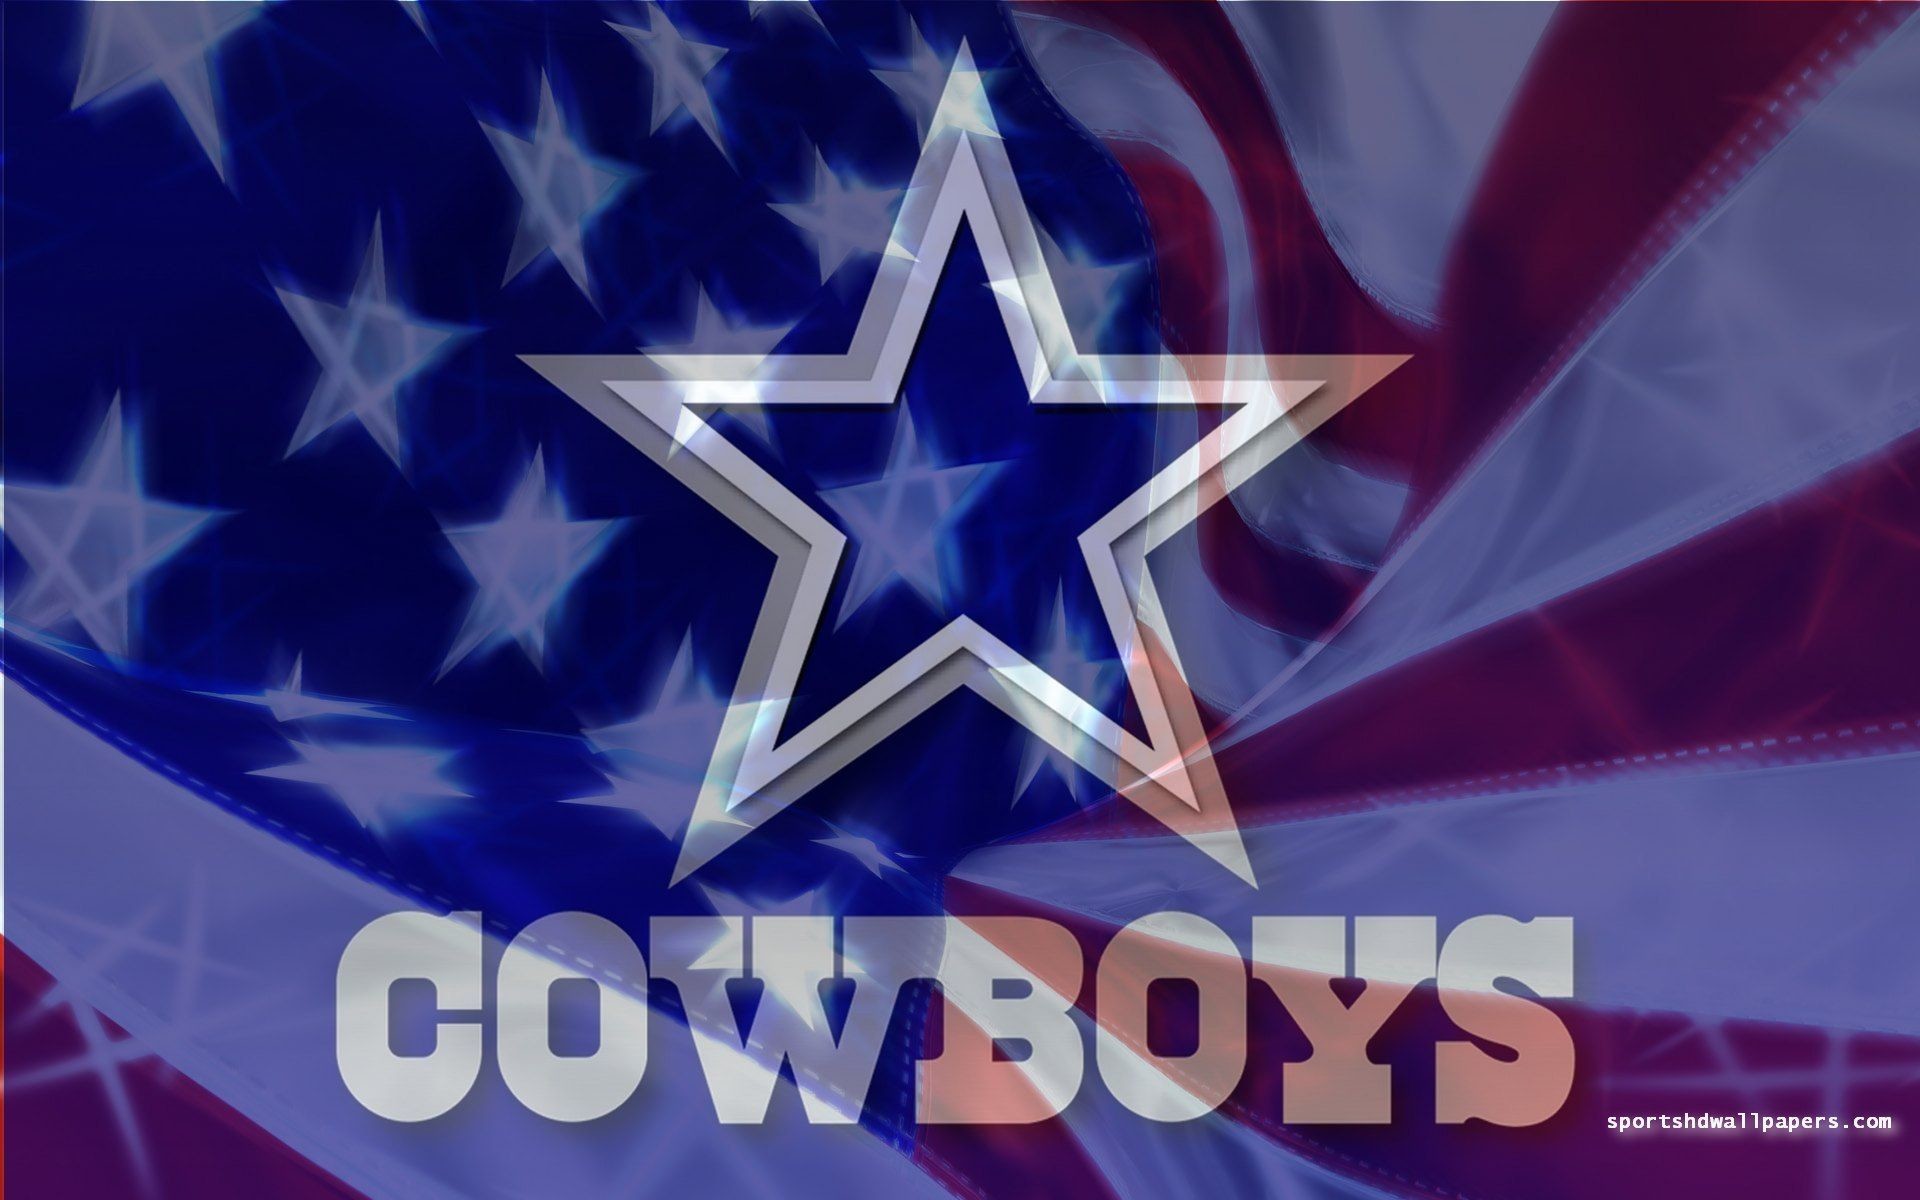 1920x1200 Dallas Cowboys Live Wallpapers Group | HD Wallpapers | Pinterest | Hd  wallpaper and Wallpaper